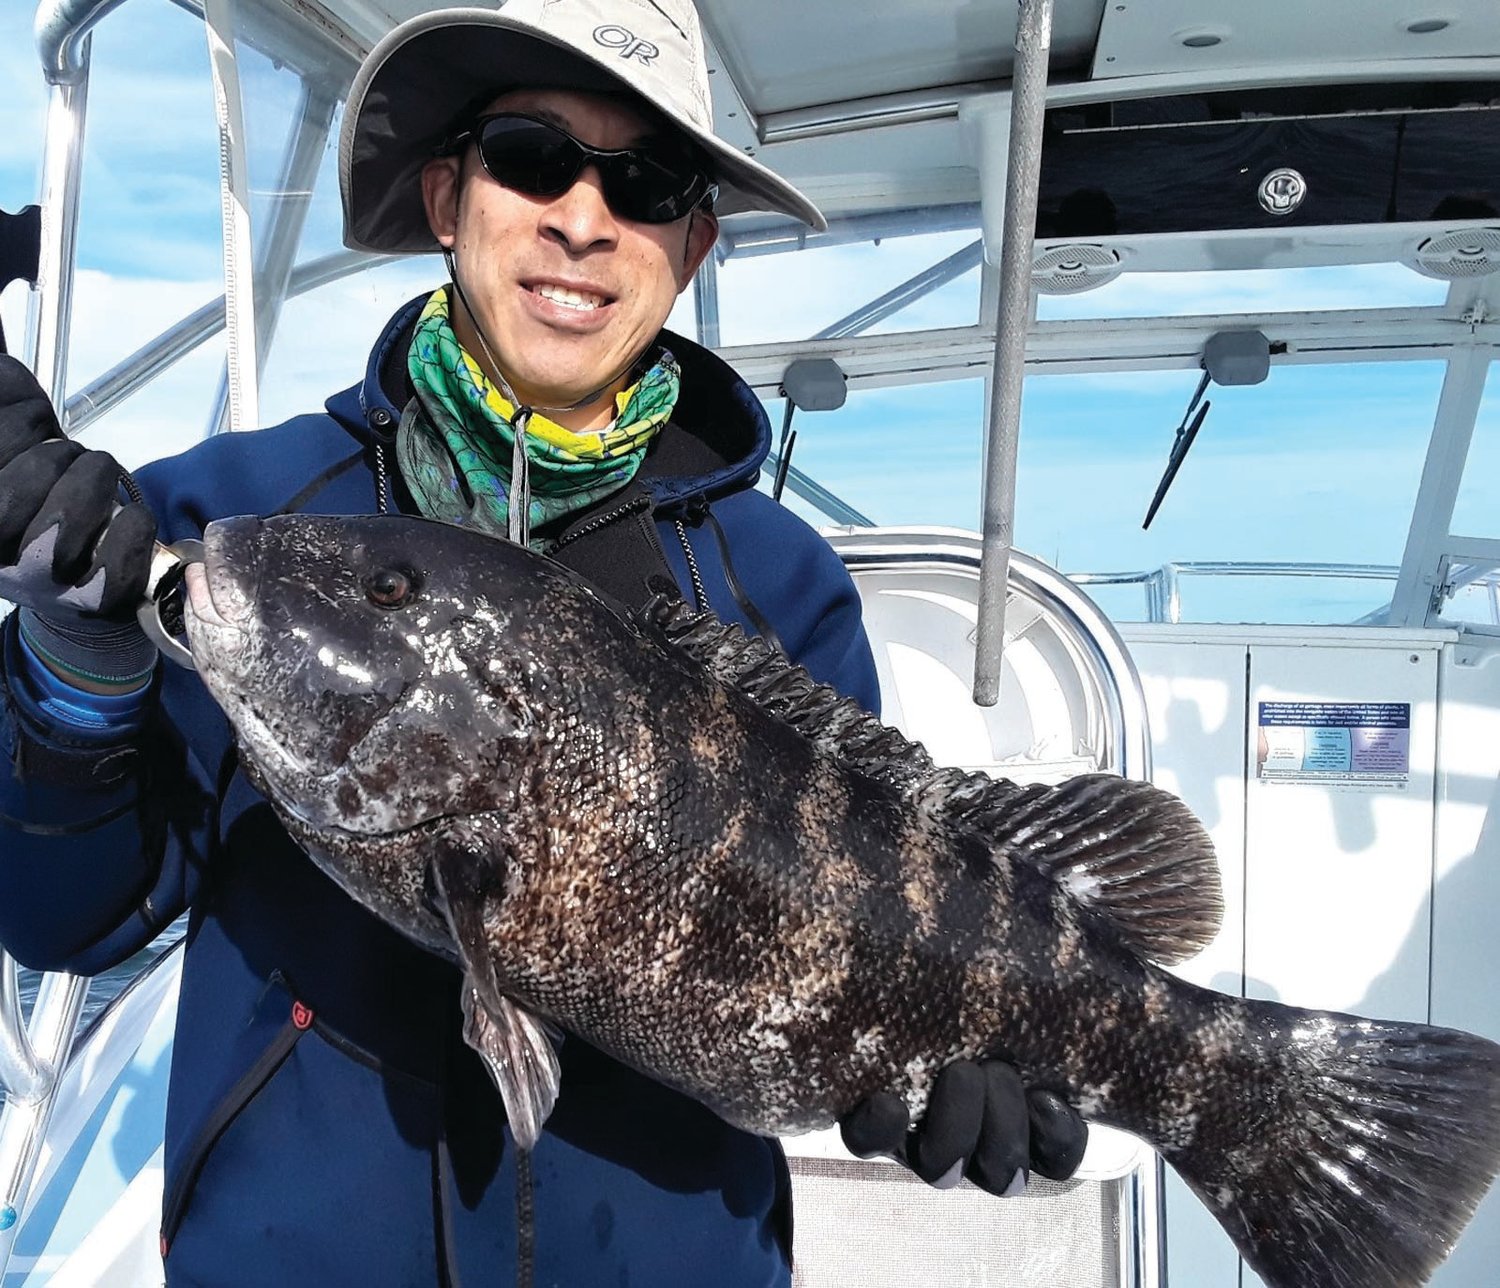 TAUTOG SEASON: Jamie Wong with a tautog caught in the fall off Newport. Tautog season opened with a three fish/person/day limit (16-inch minimum size) this week in Rhode Island and Massachusetts.